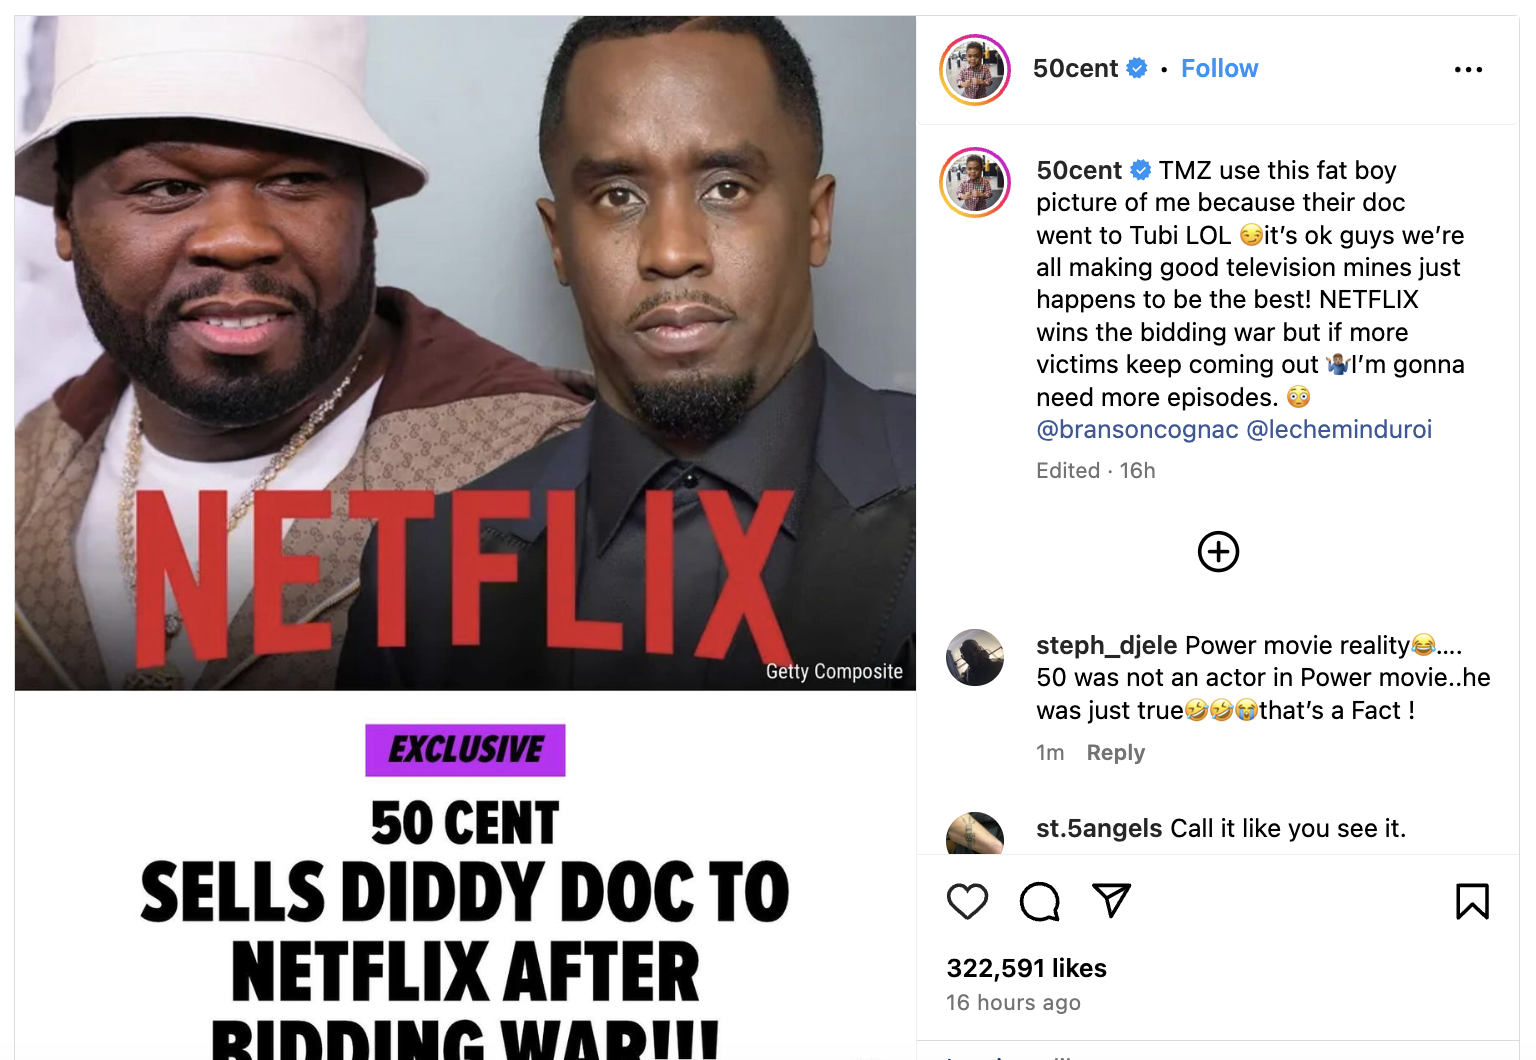 50 Cent and Diddy in a Netflix deal image caption stating 50 Cent sells Diddy documentary to Netflix after a bidding war